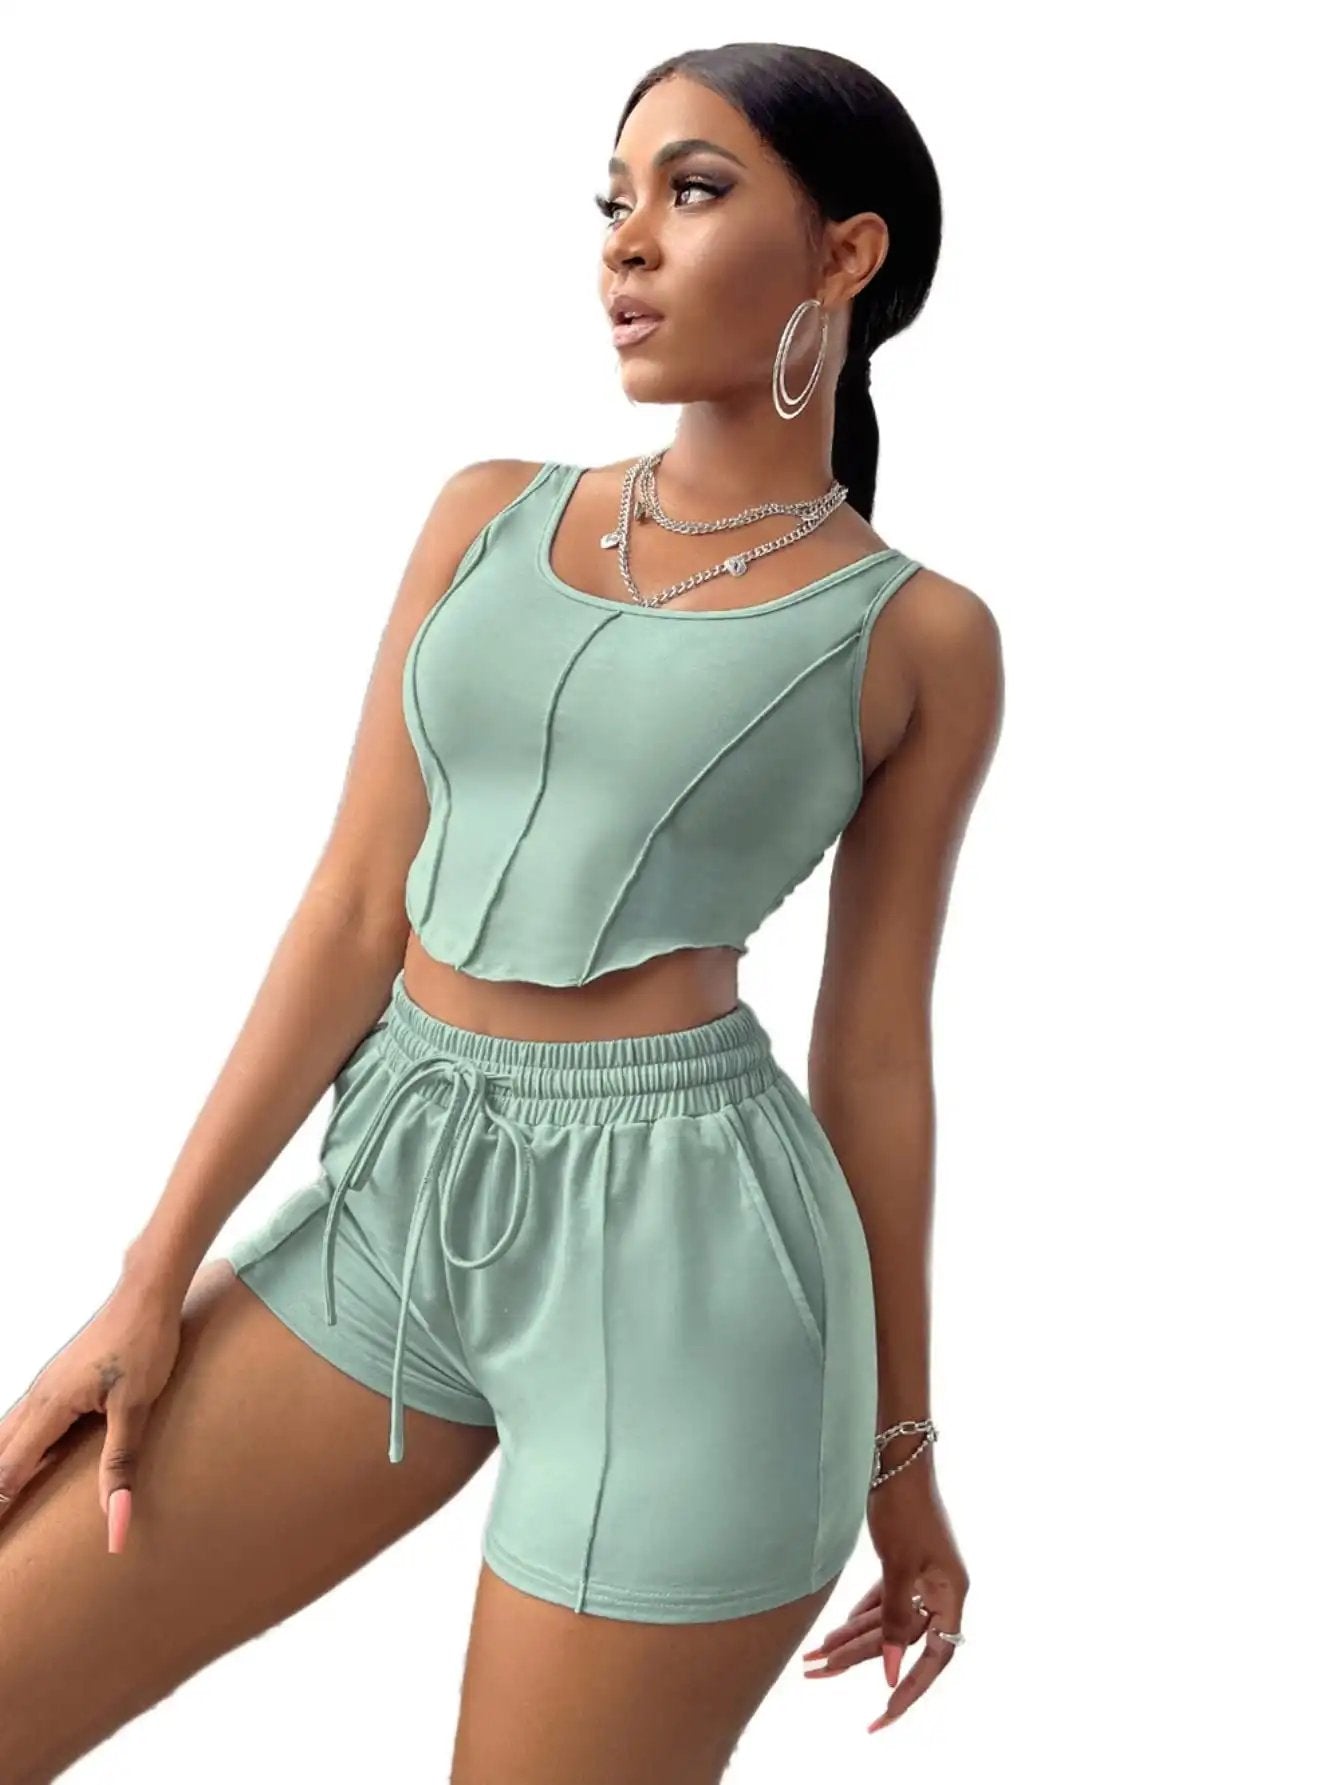 WILKYs0Fashion Irregular Strap Women's Suit
 Product information:
 
 Color: light green, black, white, khaki, brown, pink, light blue
 
 Main fabric composition: Polyester (polyester fiber)
 
 Size: XS,S,M,L
